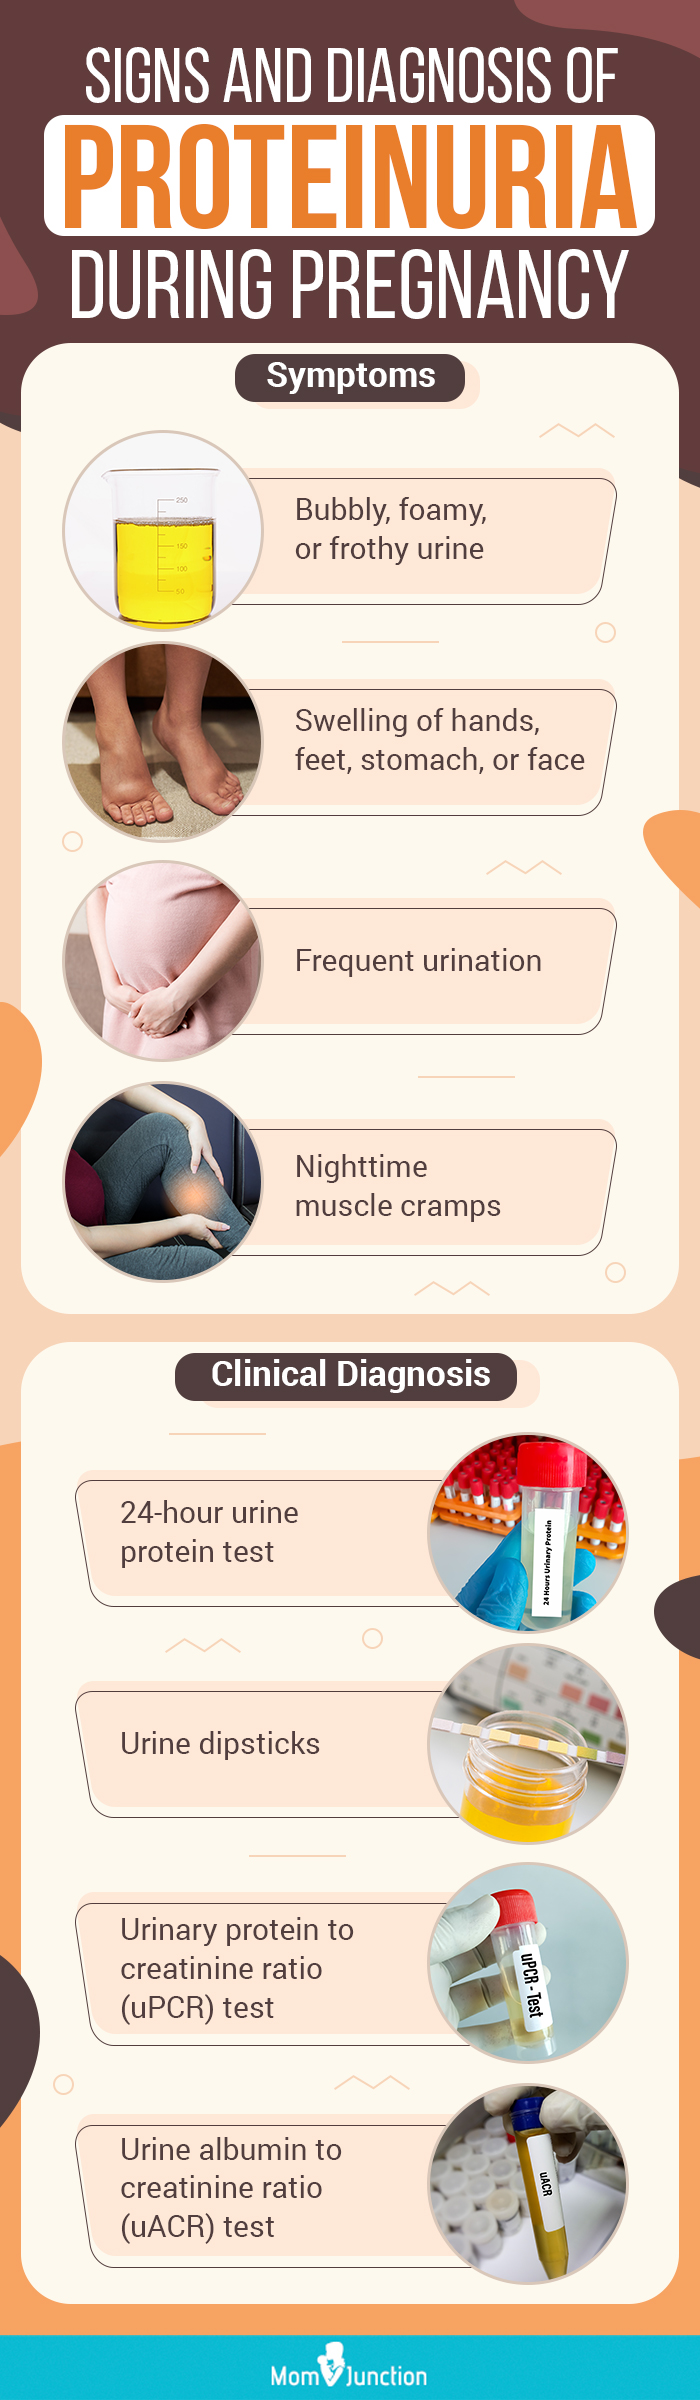 Protein In Urine During Pregnancy: Signs, Causes & Treatment